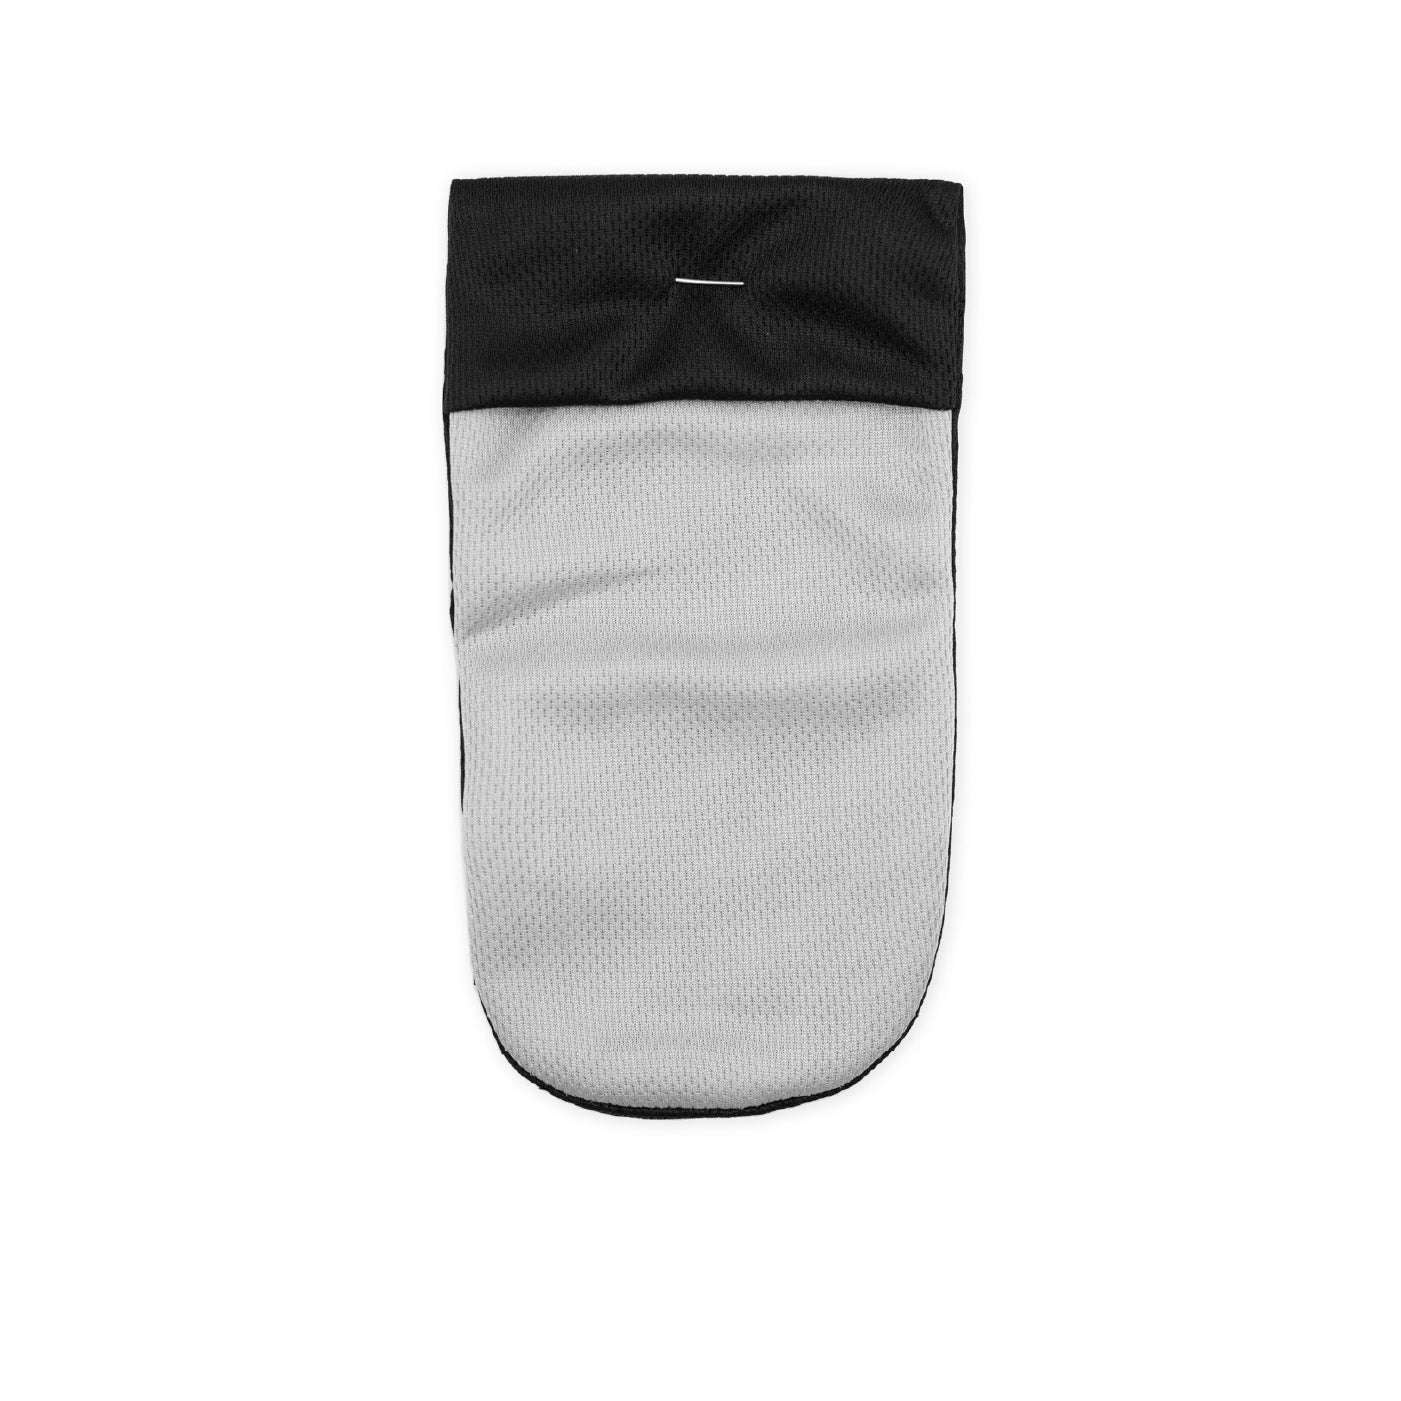 A Classic Sports Joey pouch on a white background